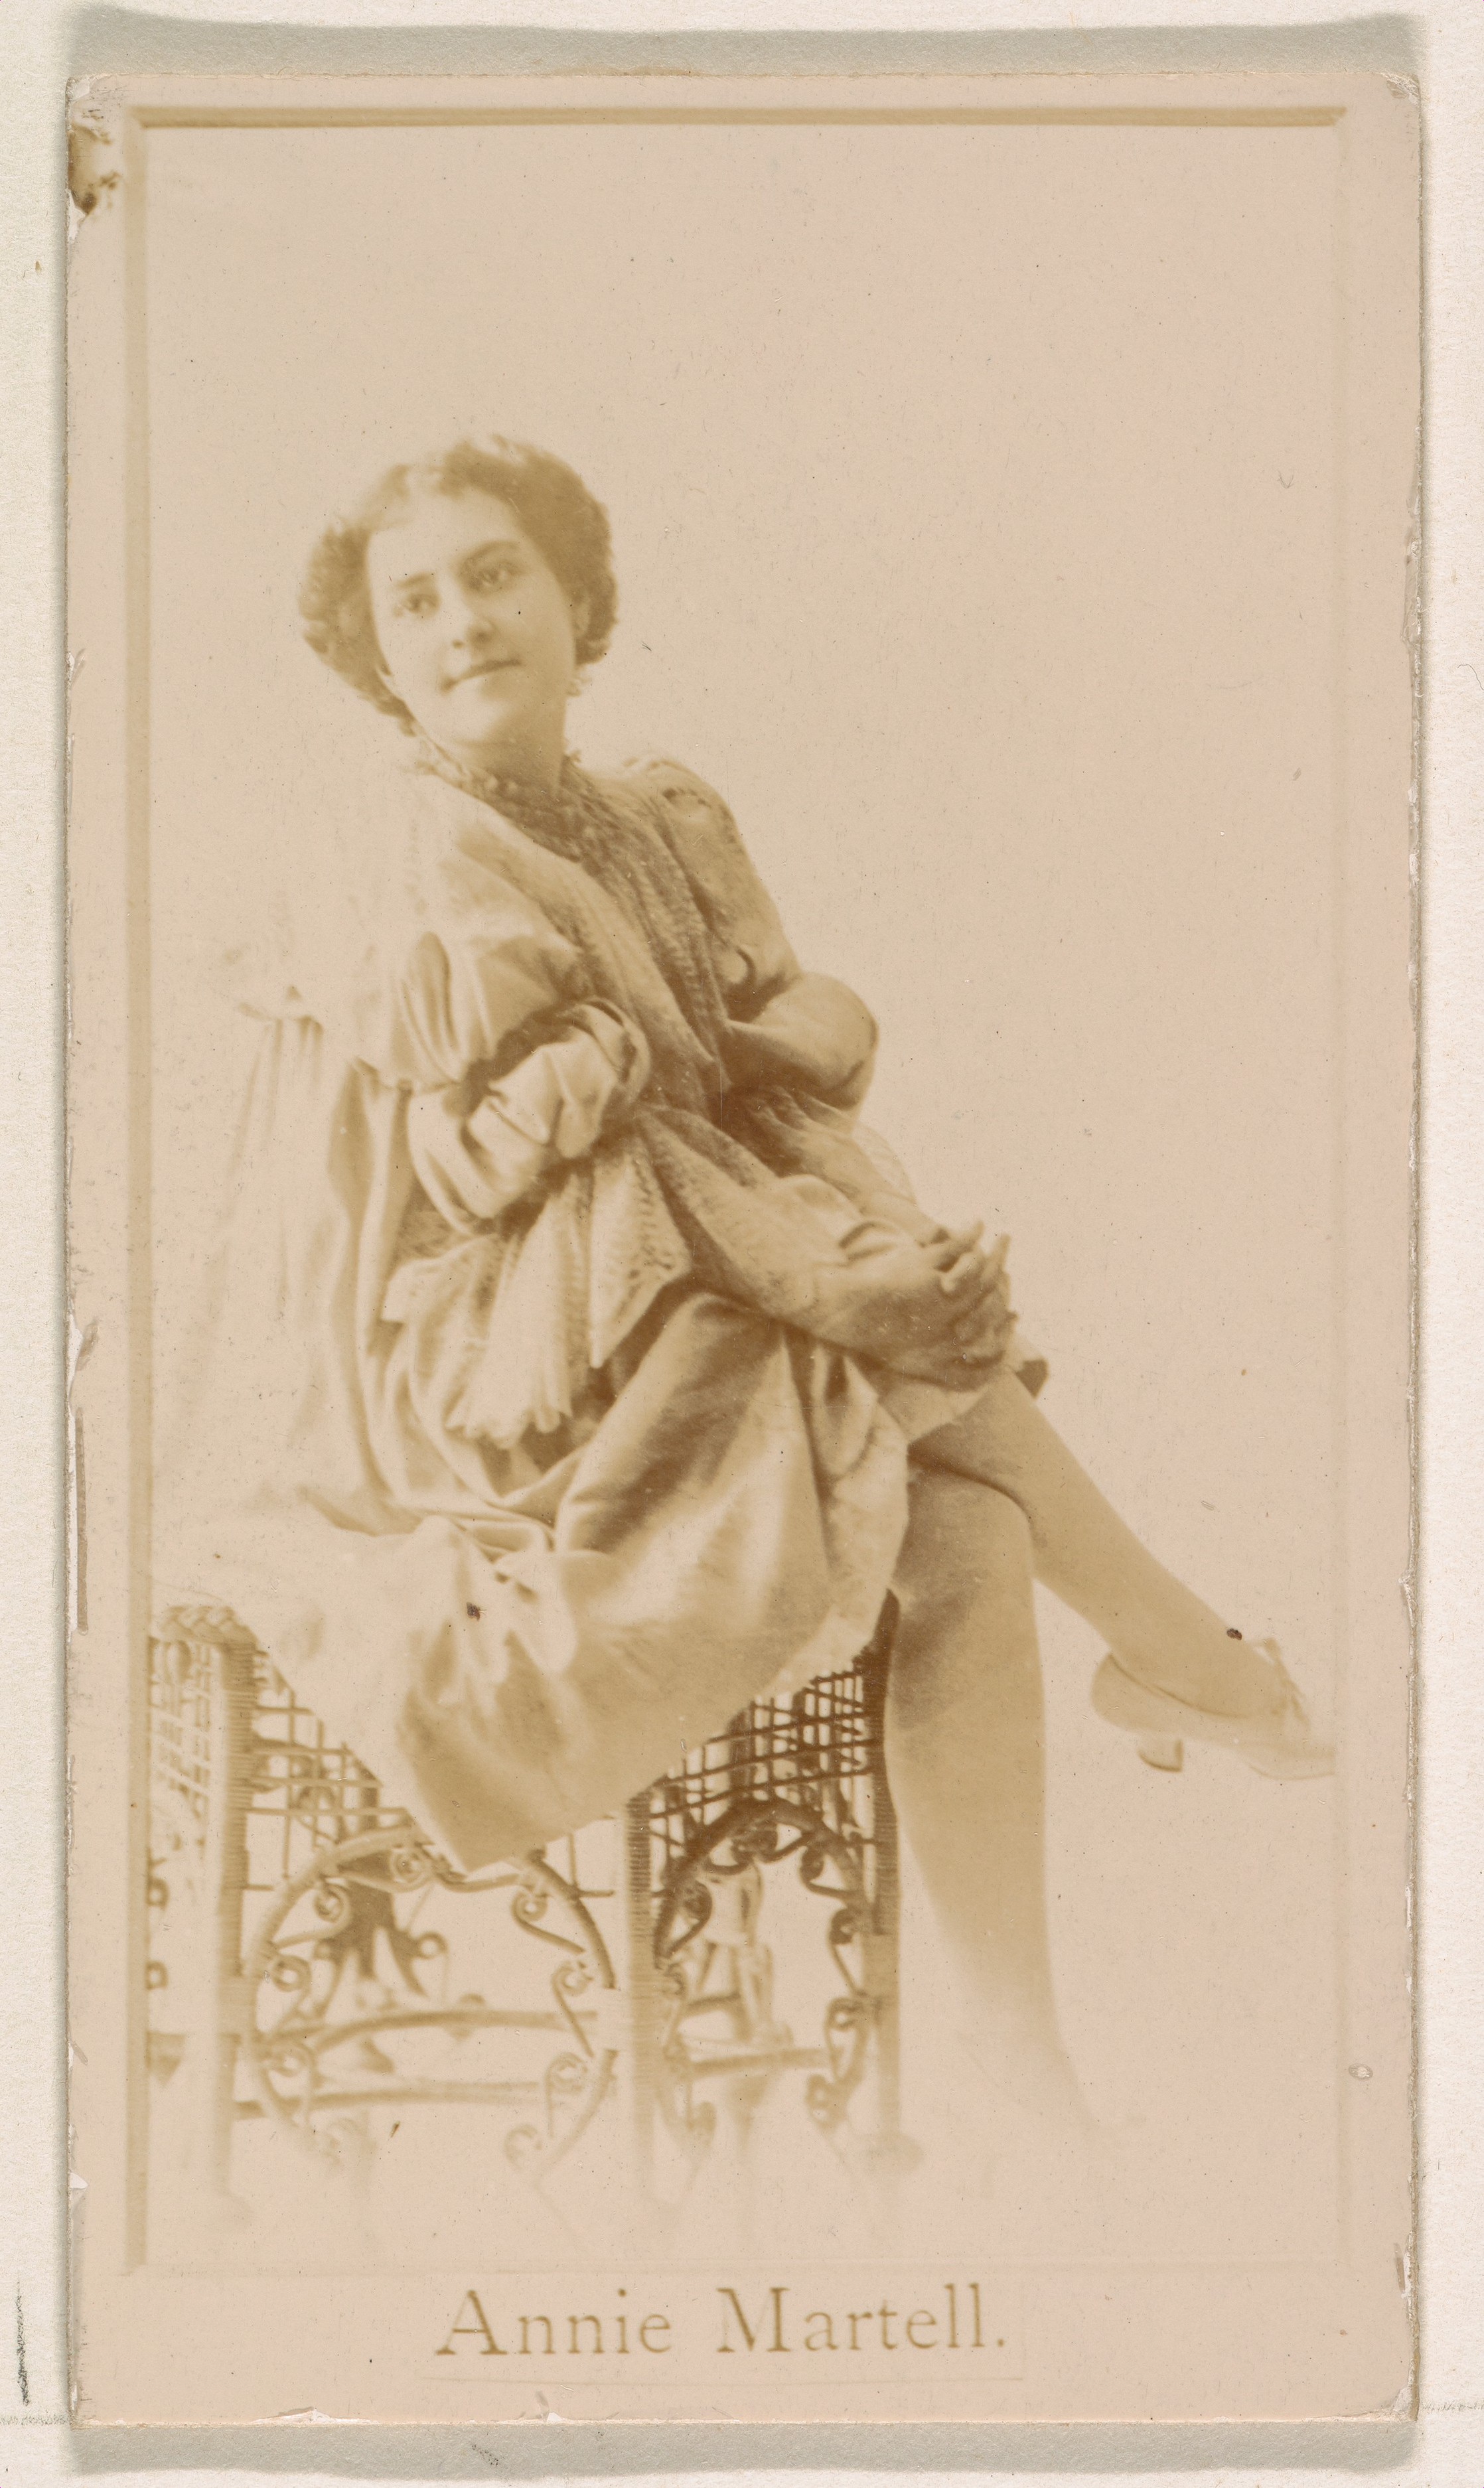 Issued by Kinney Brothers Tobacco Company, Annie Martell, from the Actresses  series (N245) issued by Kinney Brothers to promote Sweet Caporal Cigarettes